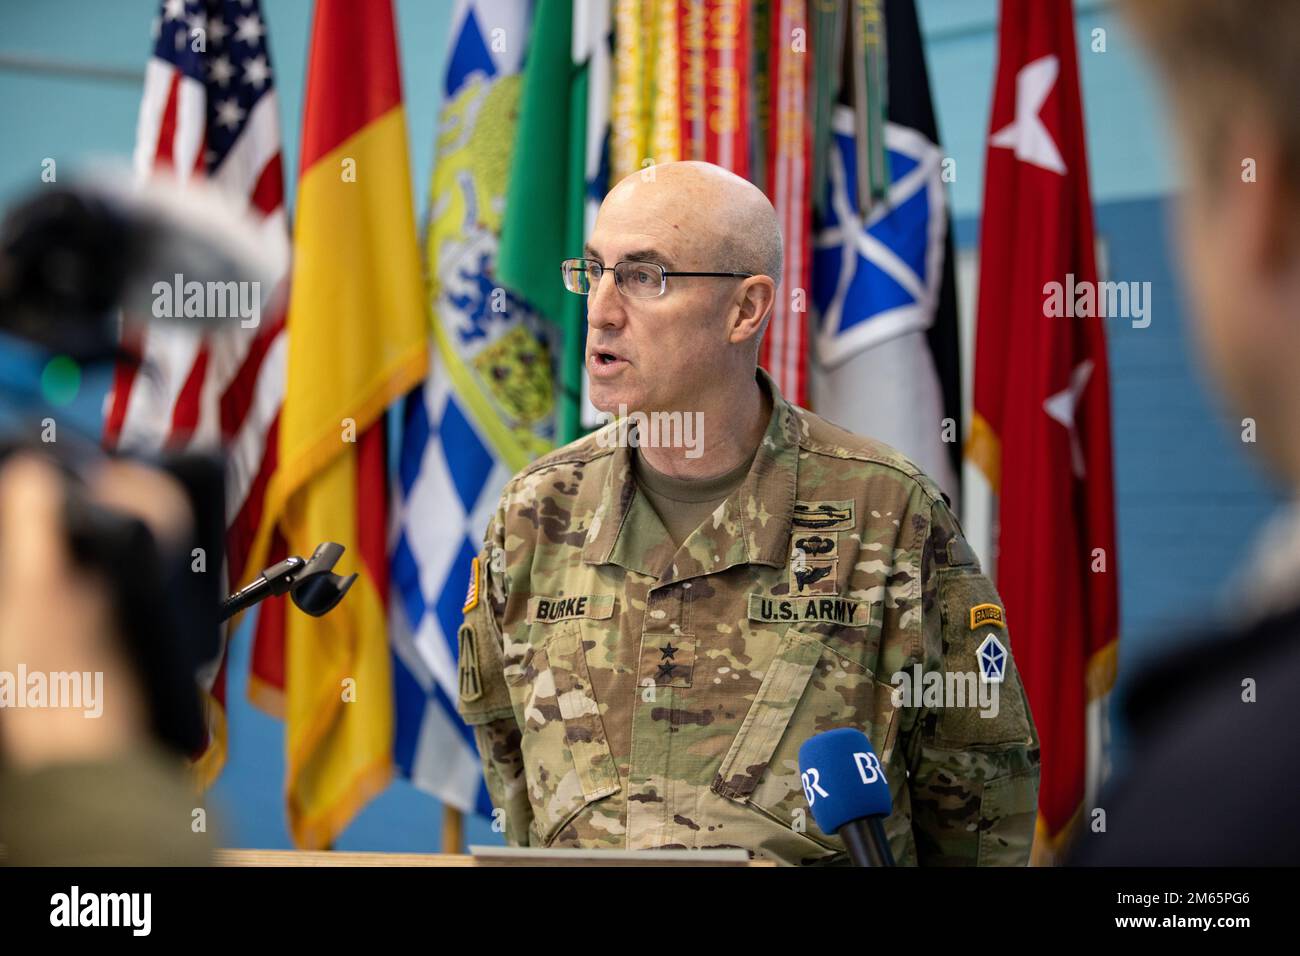 ANSBACH, Germany - Maj. Gen. Robert Burke, deputy commanding general of support, V Corps, addresses the press during a press conference in Ansbach after a welcome ceremony at Barton Barracks in Ansbach, Germany, Tuesday, April 5. During the ceremony, the V Corps headquarters and the headquarters and headquarters battalion uncased their colors at their temporary home. The presence of the entire Victory Corps headquarters in Europe expands U.S. Army Europe and Africa’s ability to command land forces in Europe and sends a strong message to our NATO allies and partners that the United States is co Stock Photo